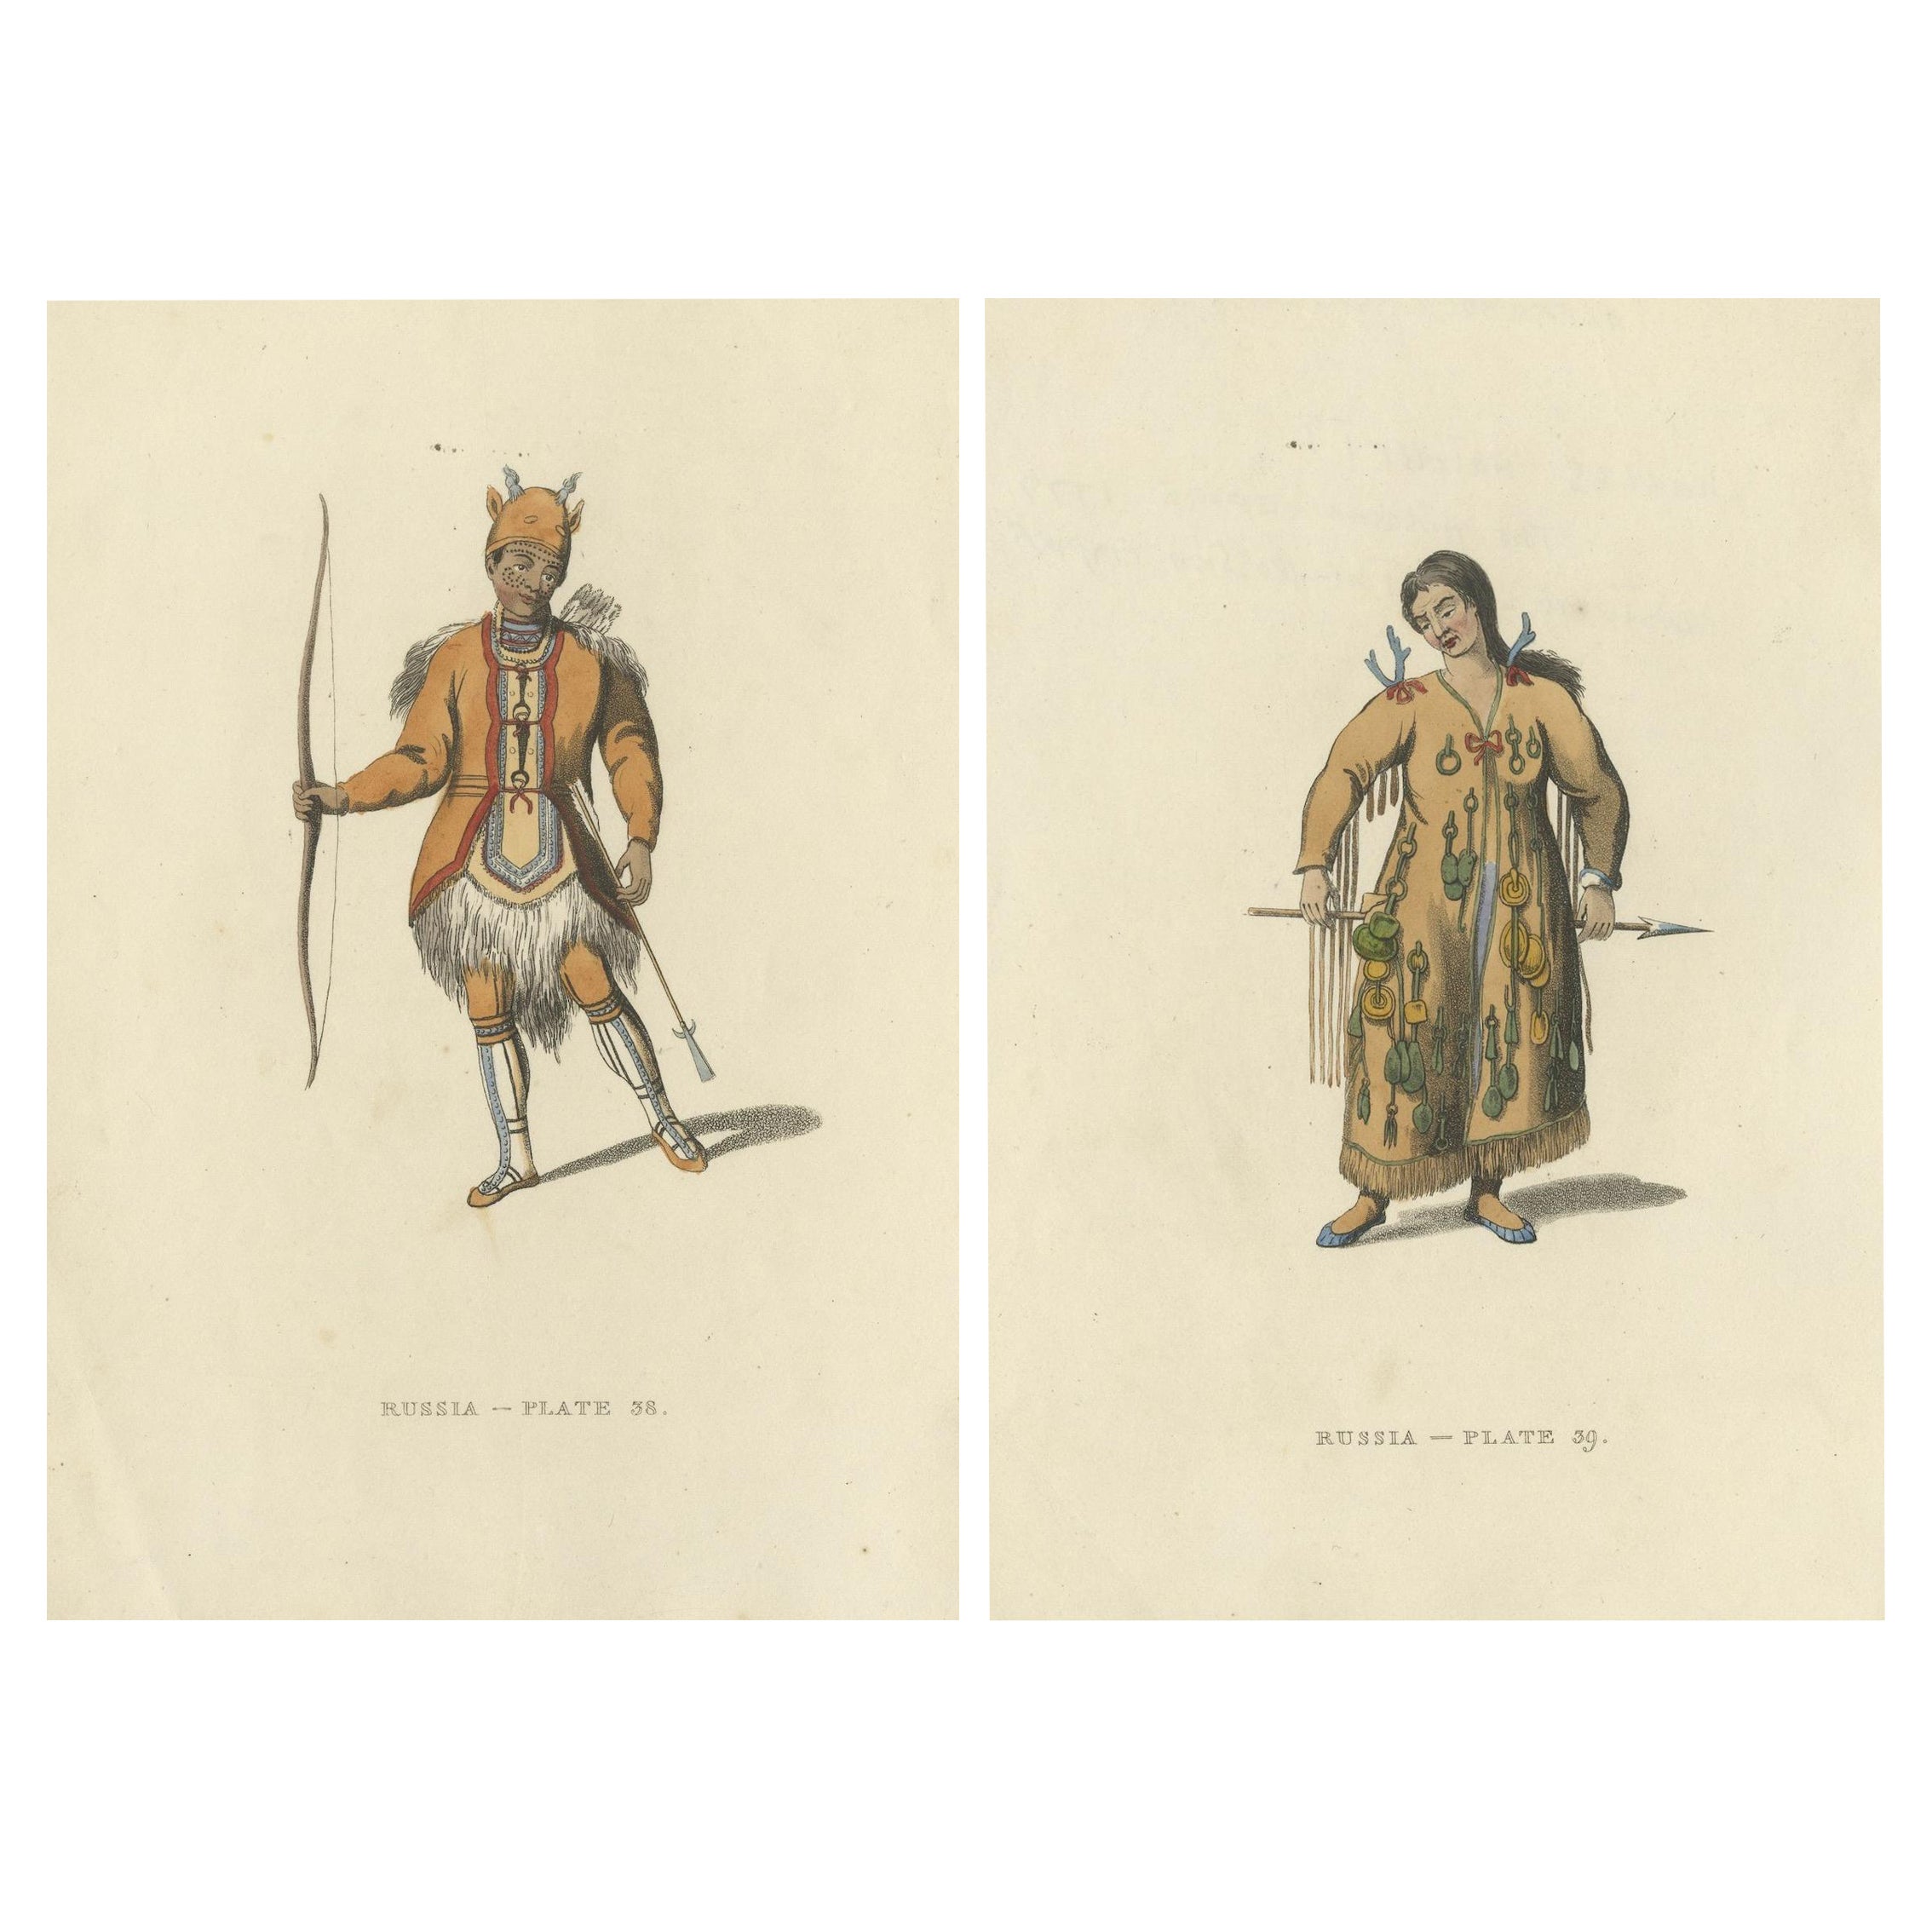 Siberian Traditions: The Tungoose Hunter and Tungoosi Shaman, Published in 1814